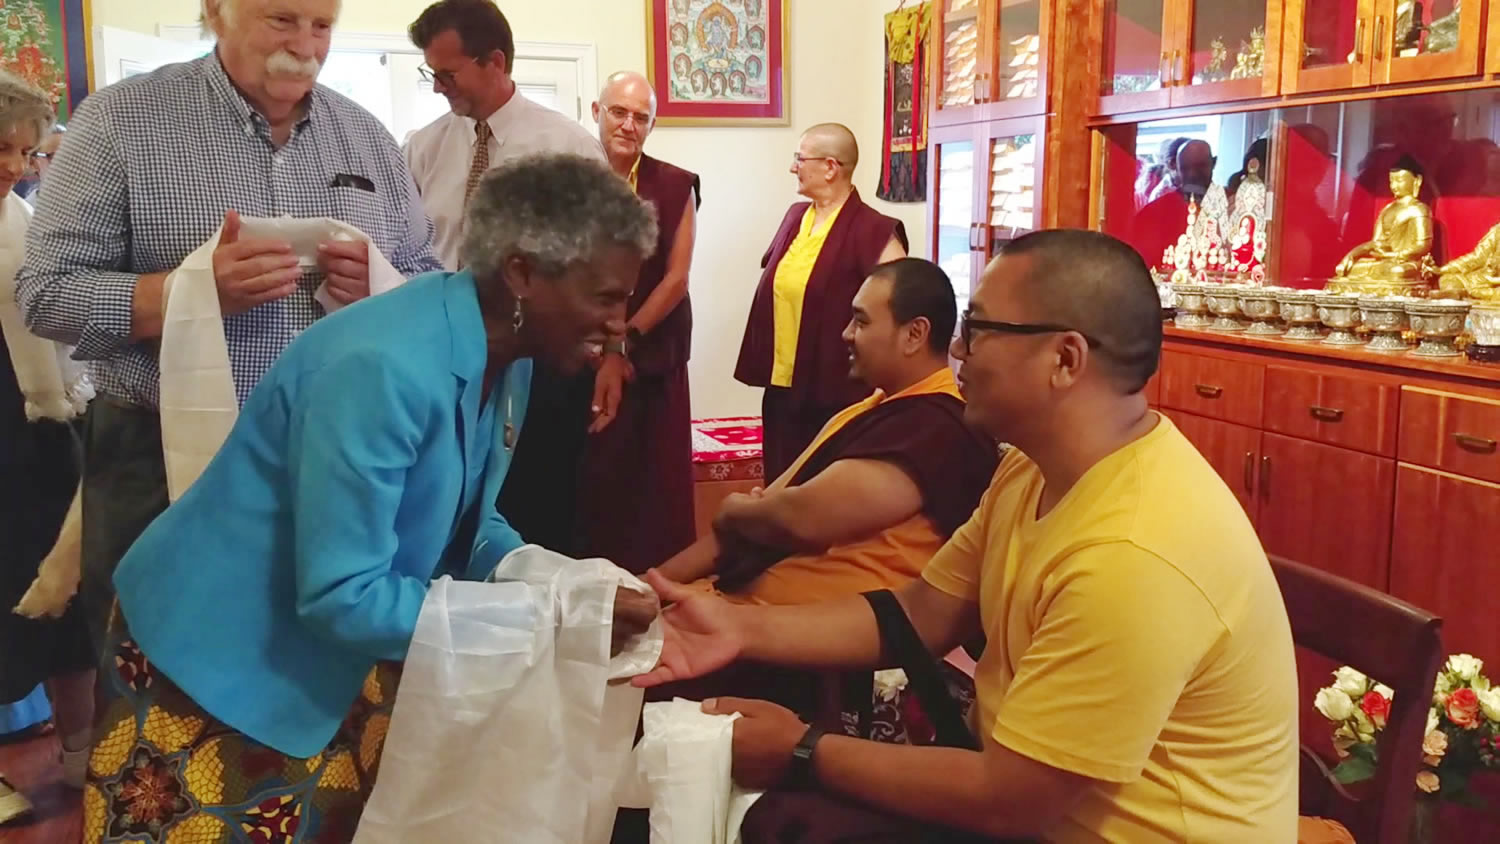 Ven. Choktrul Ngawang Jigdral Rinpoche and Ven. Khenpo Namdrol Gyatso are welcomed by the sangha